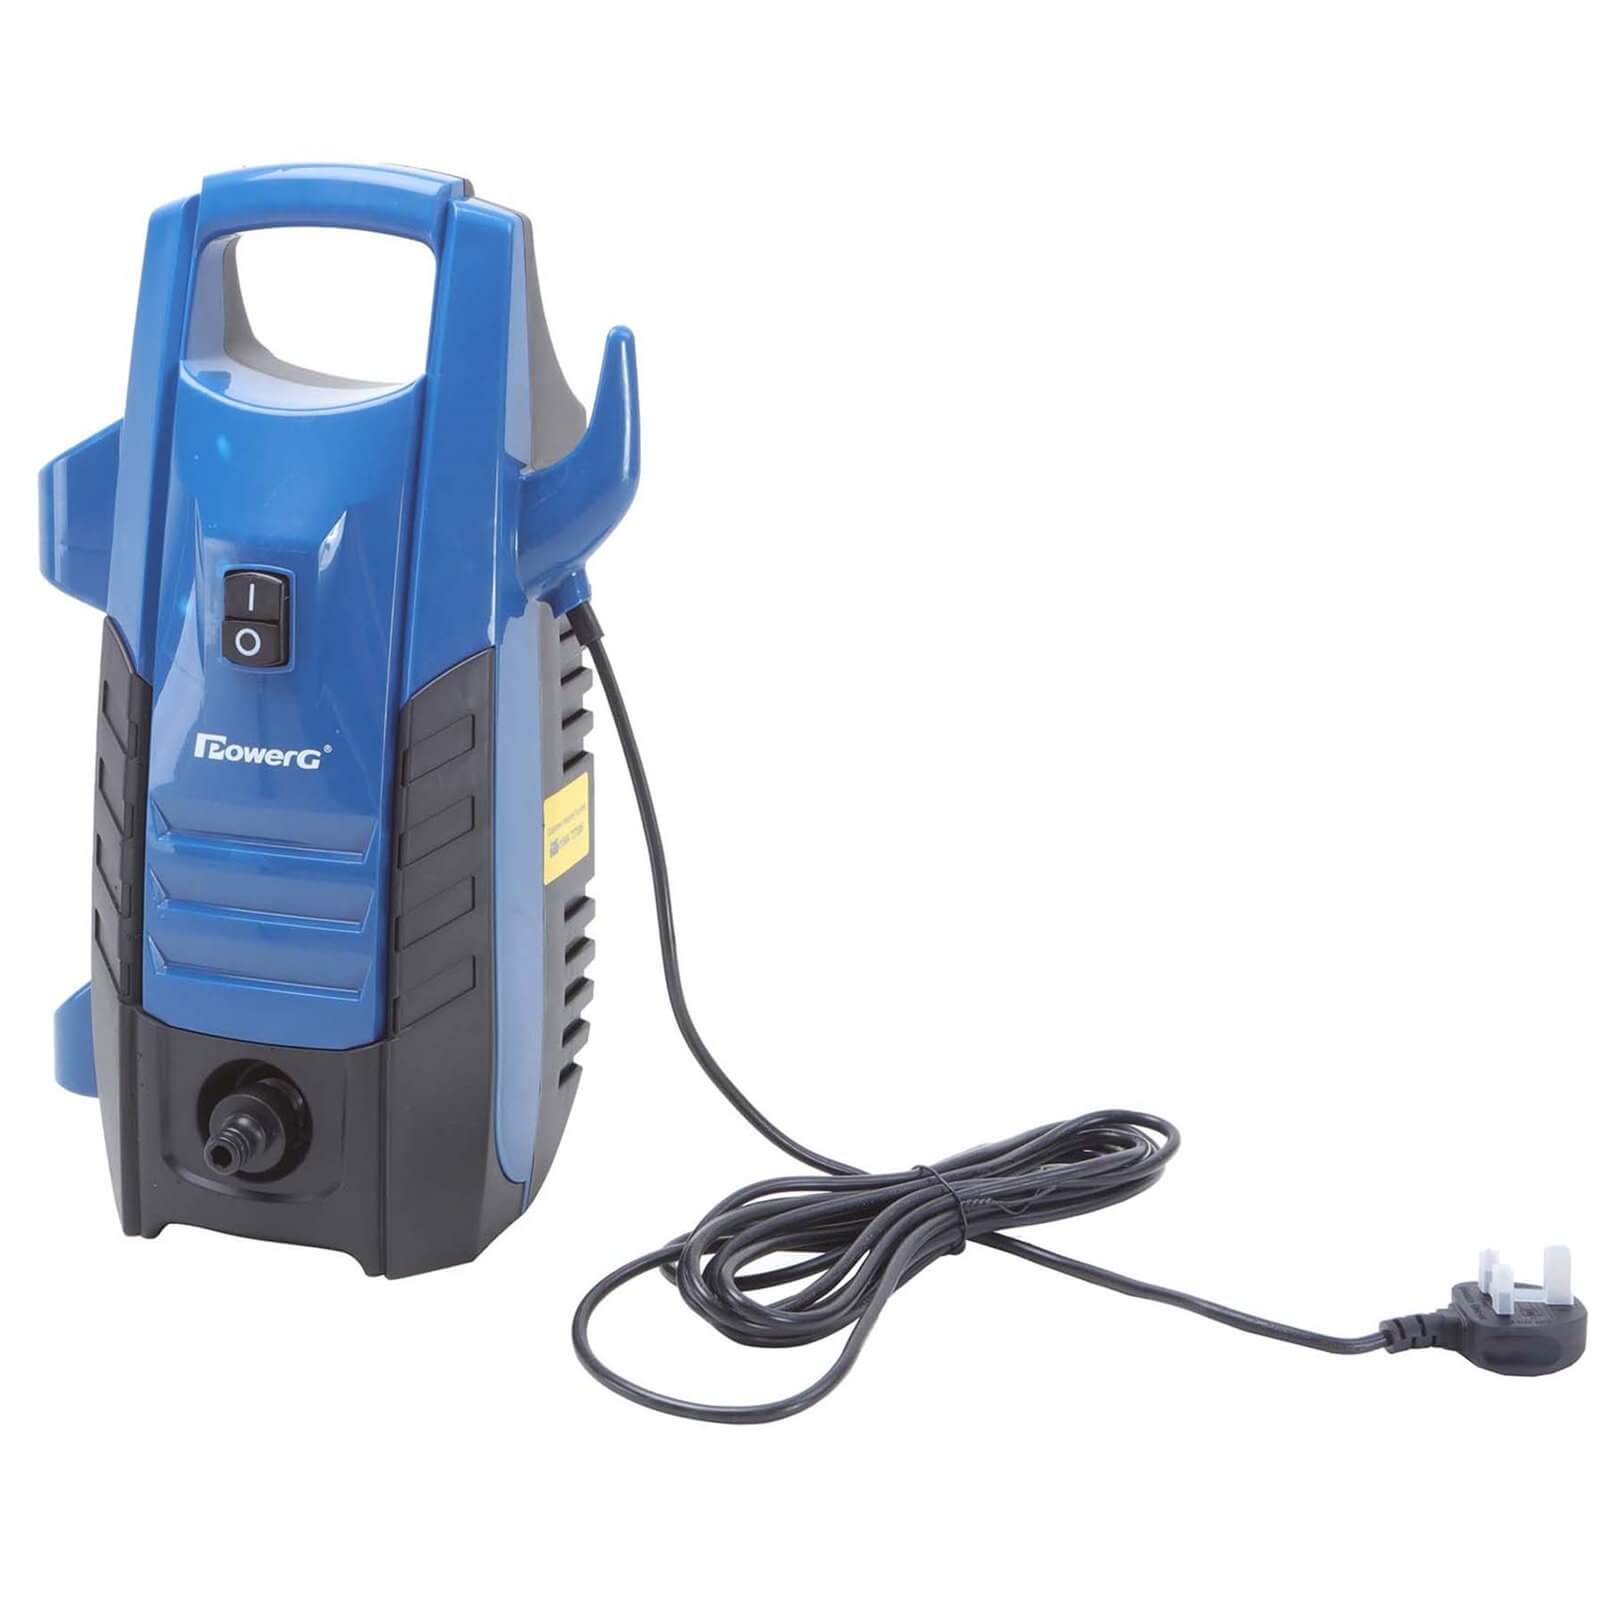 Power G Electric Pressure Washer (1400W)